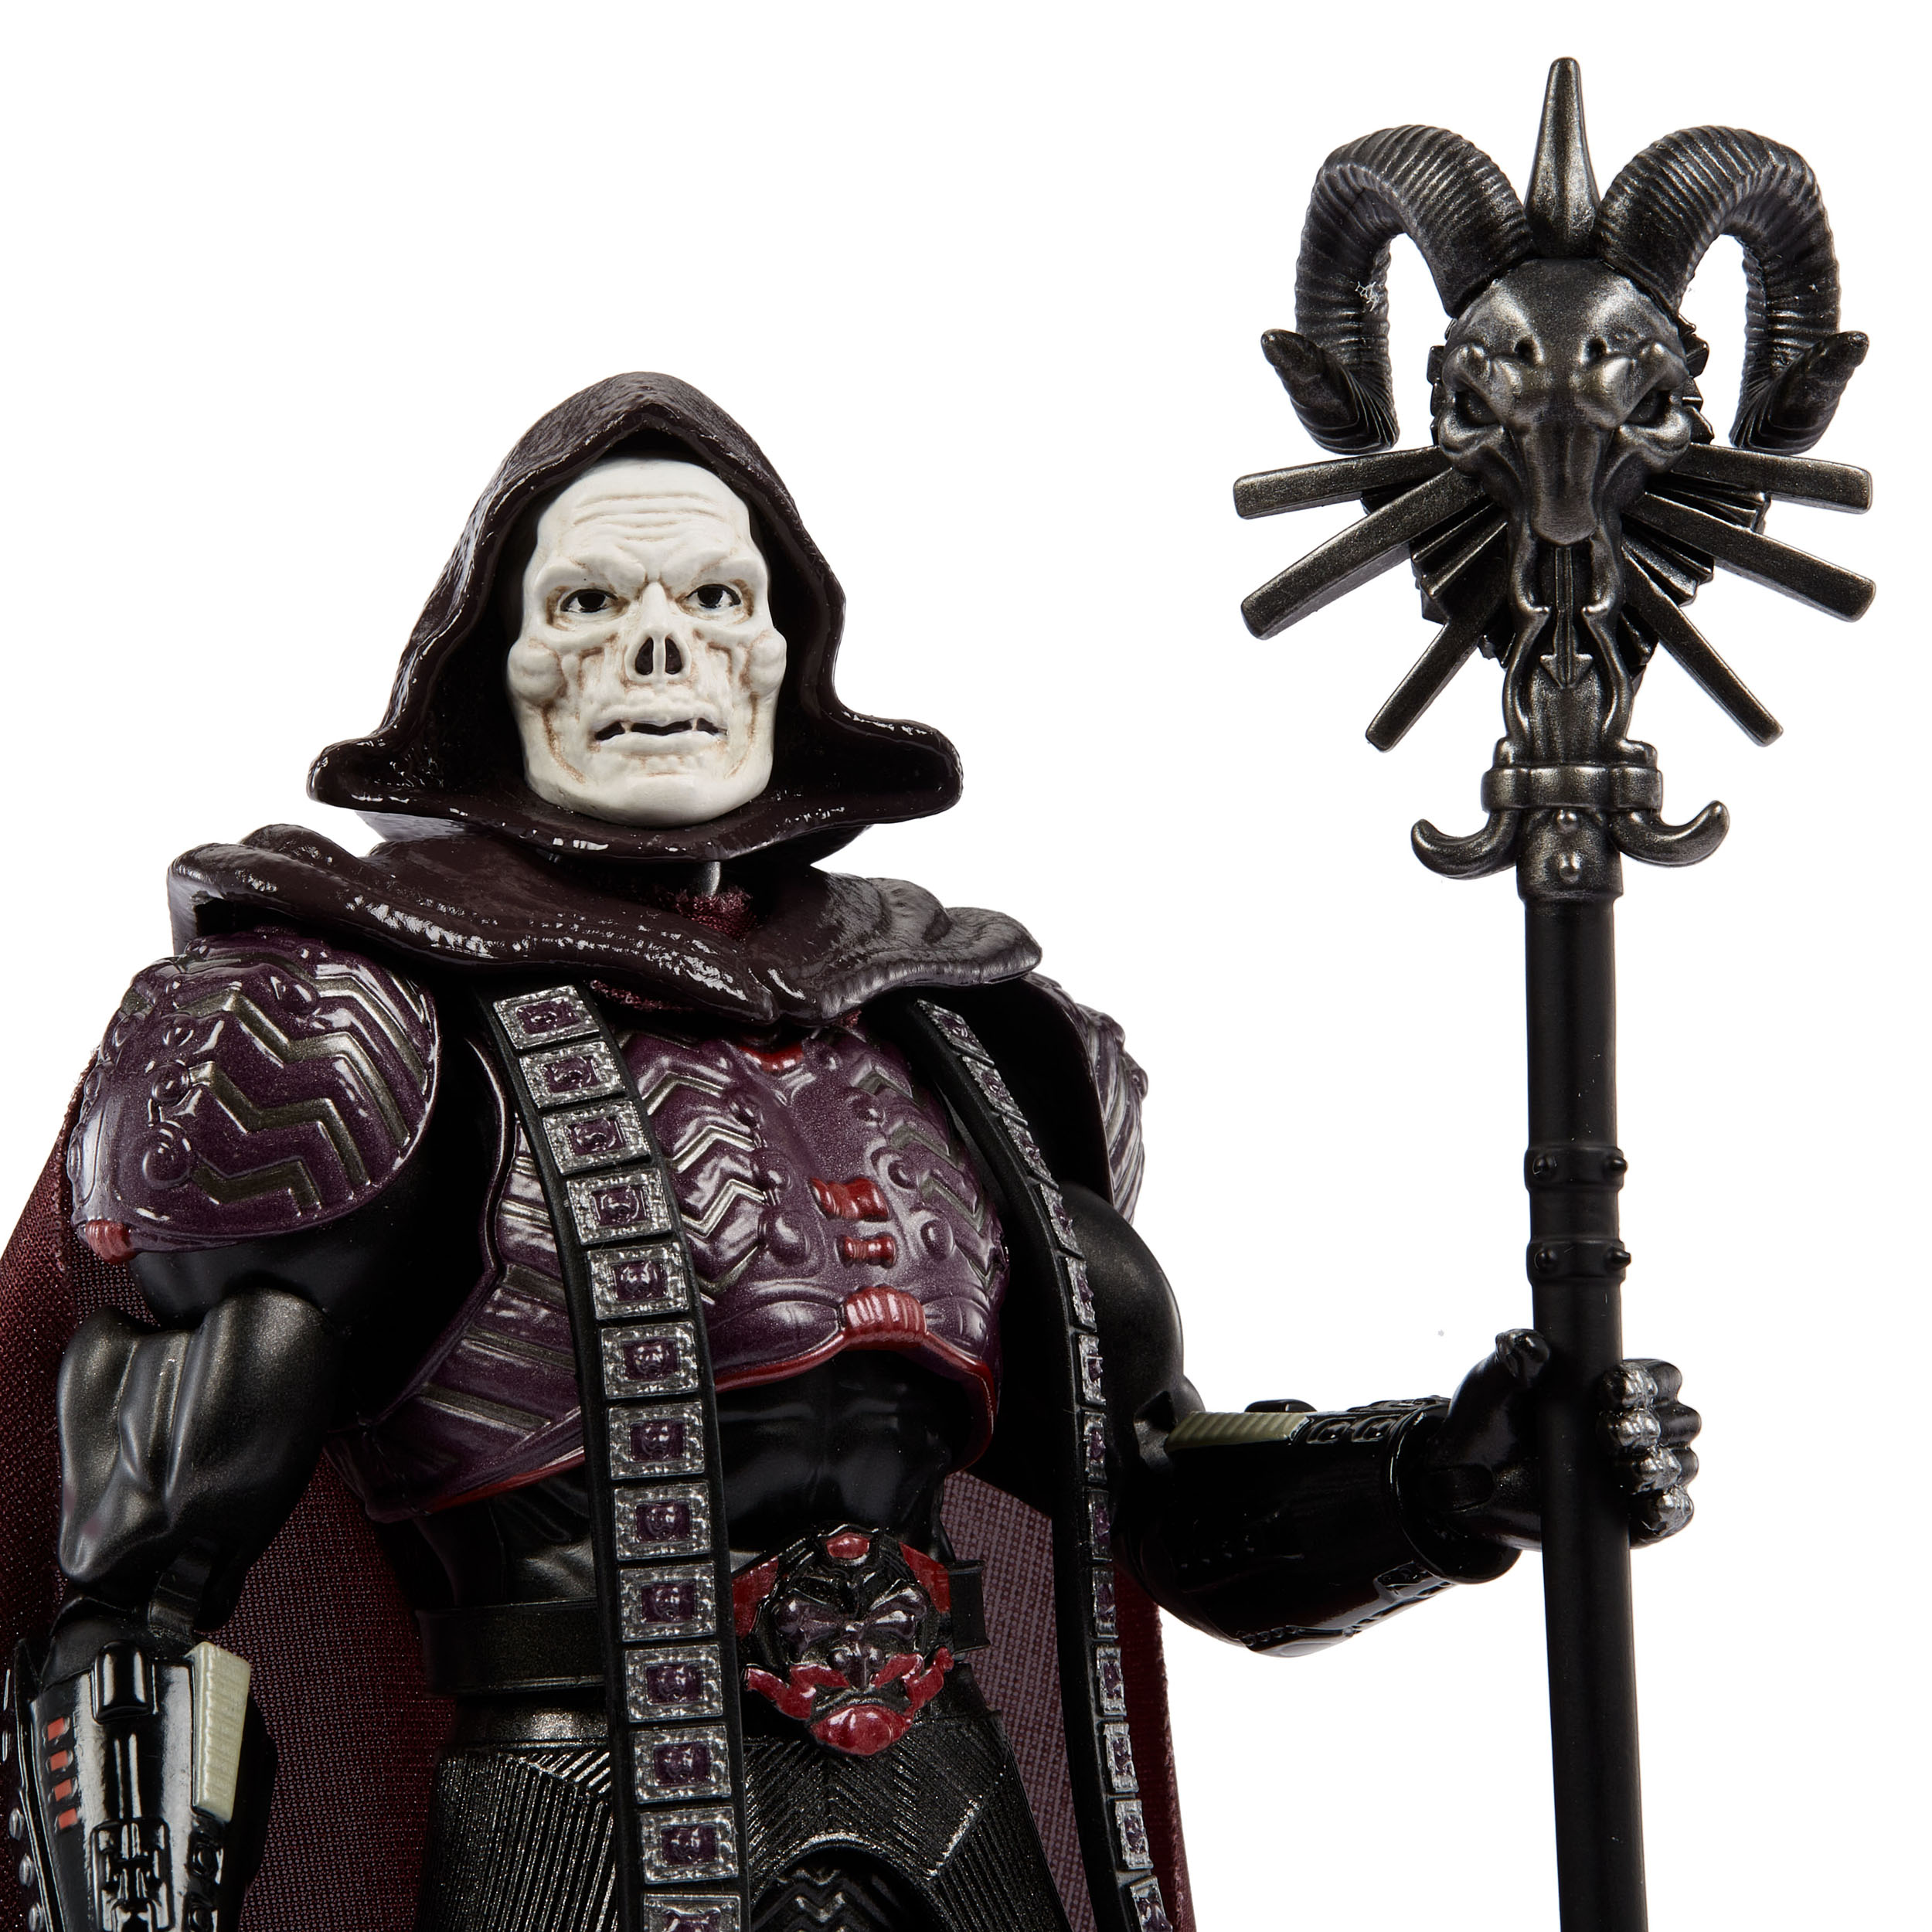 Masters of the Universe Masterverse Deluxe Actionfigur Movie Skeletor 18 cm MATTHLB56 0194735111534